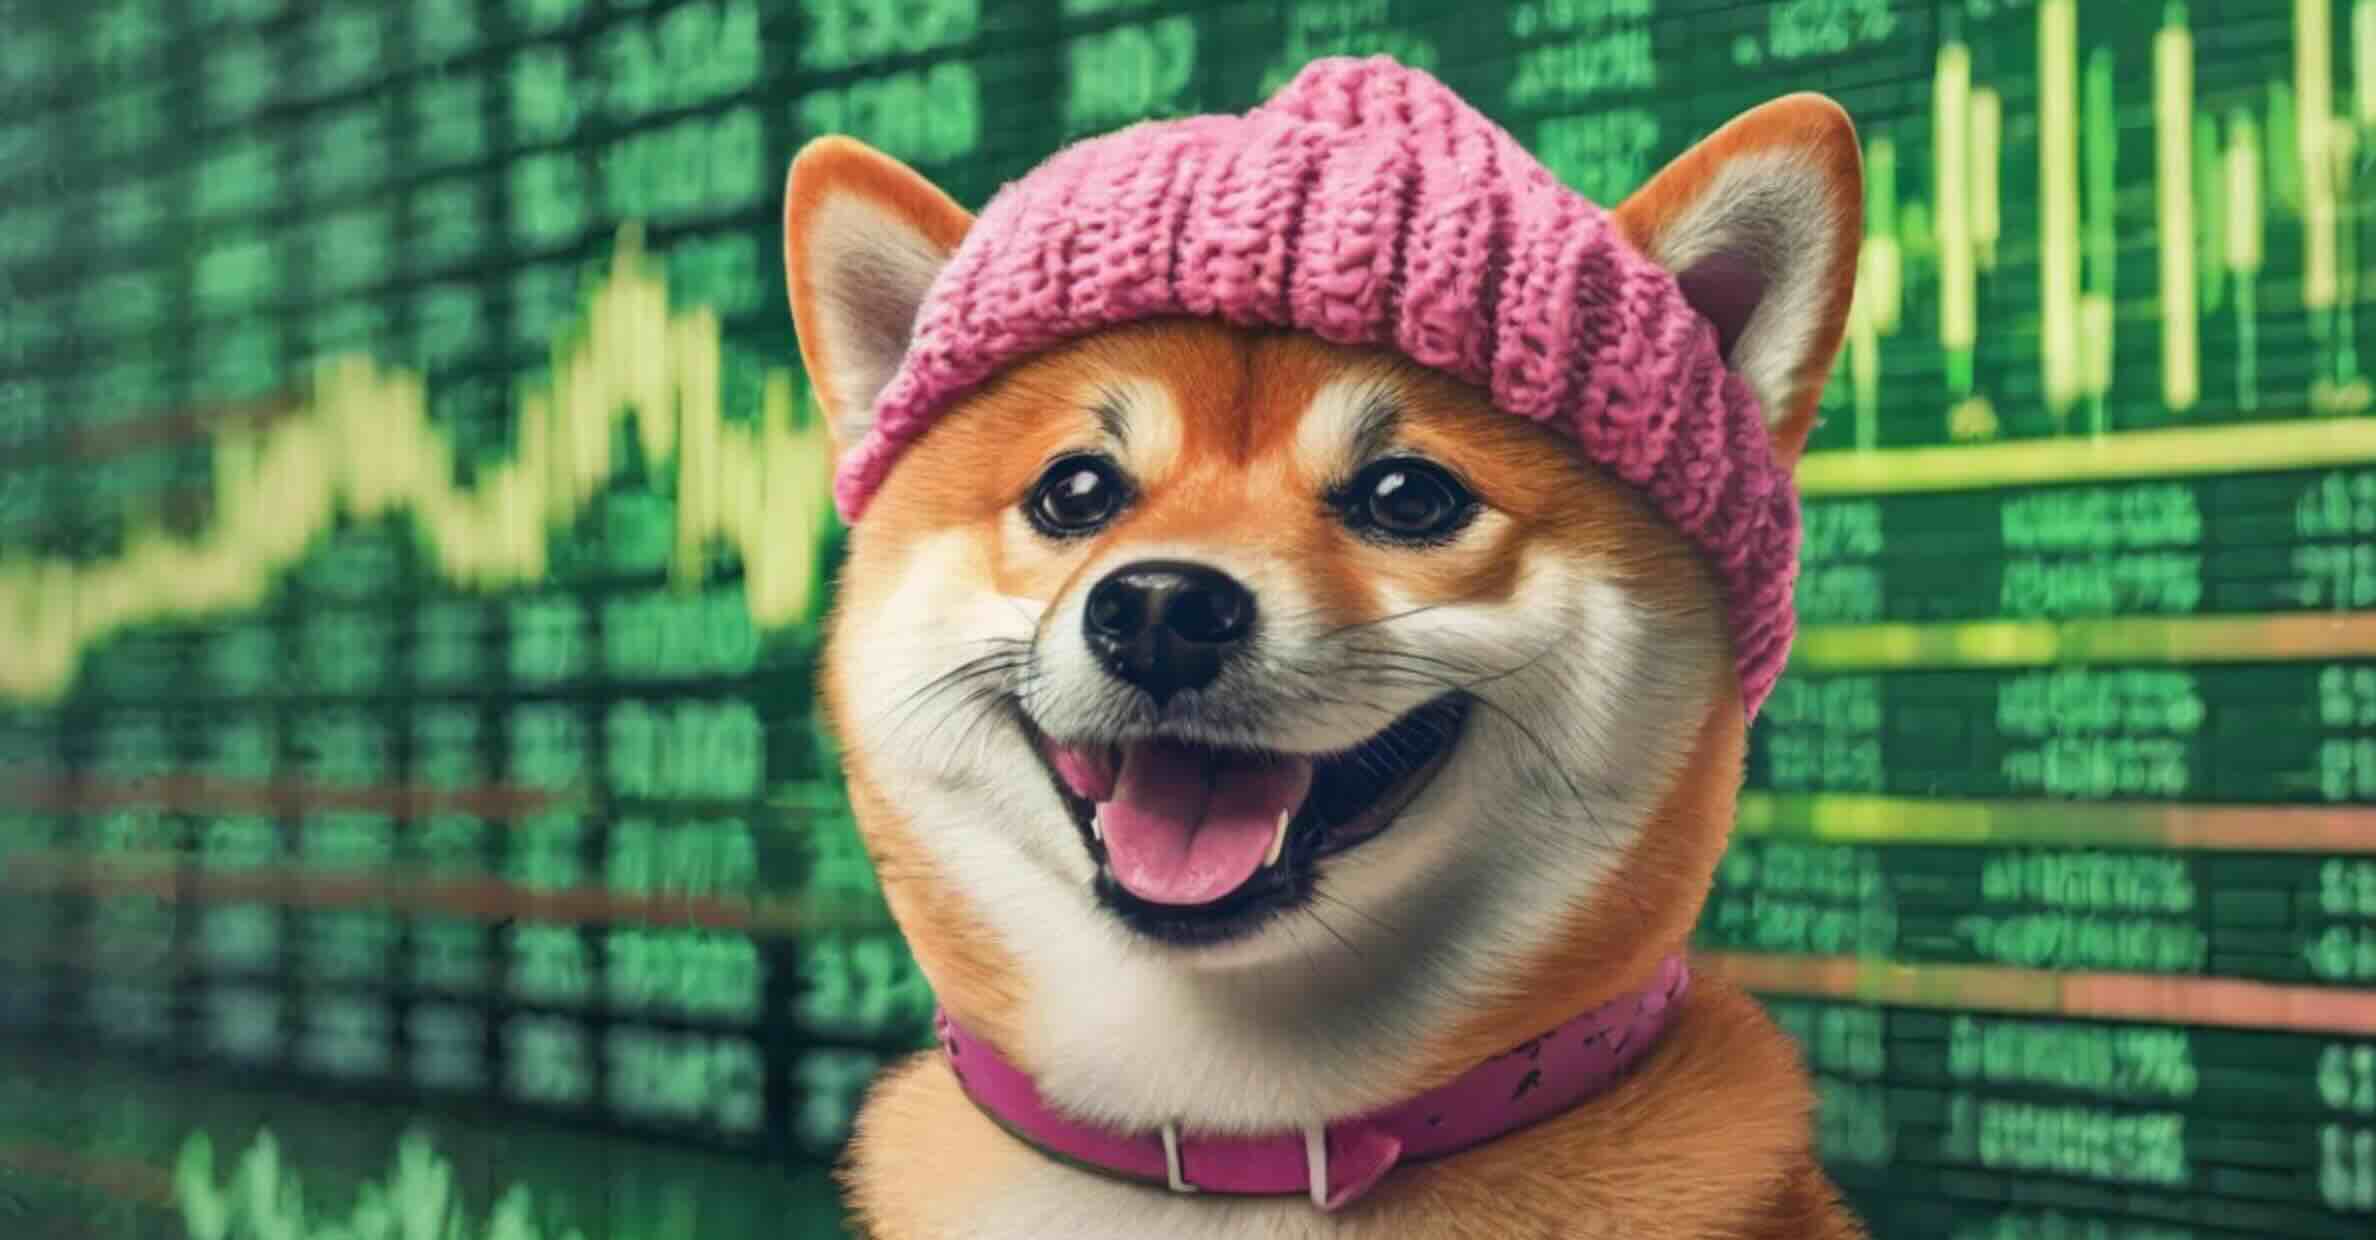 DogWifHat Price Forecast – Is There Light at the End of the Tunnel?